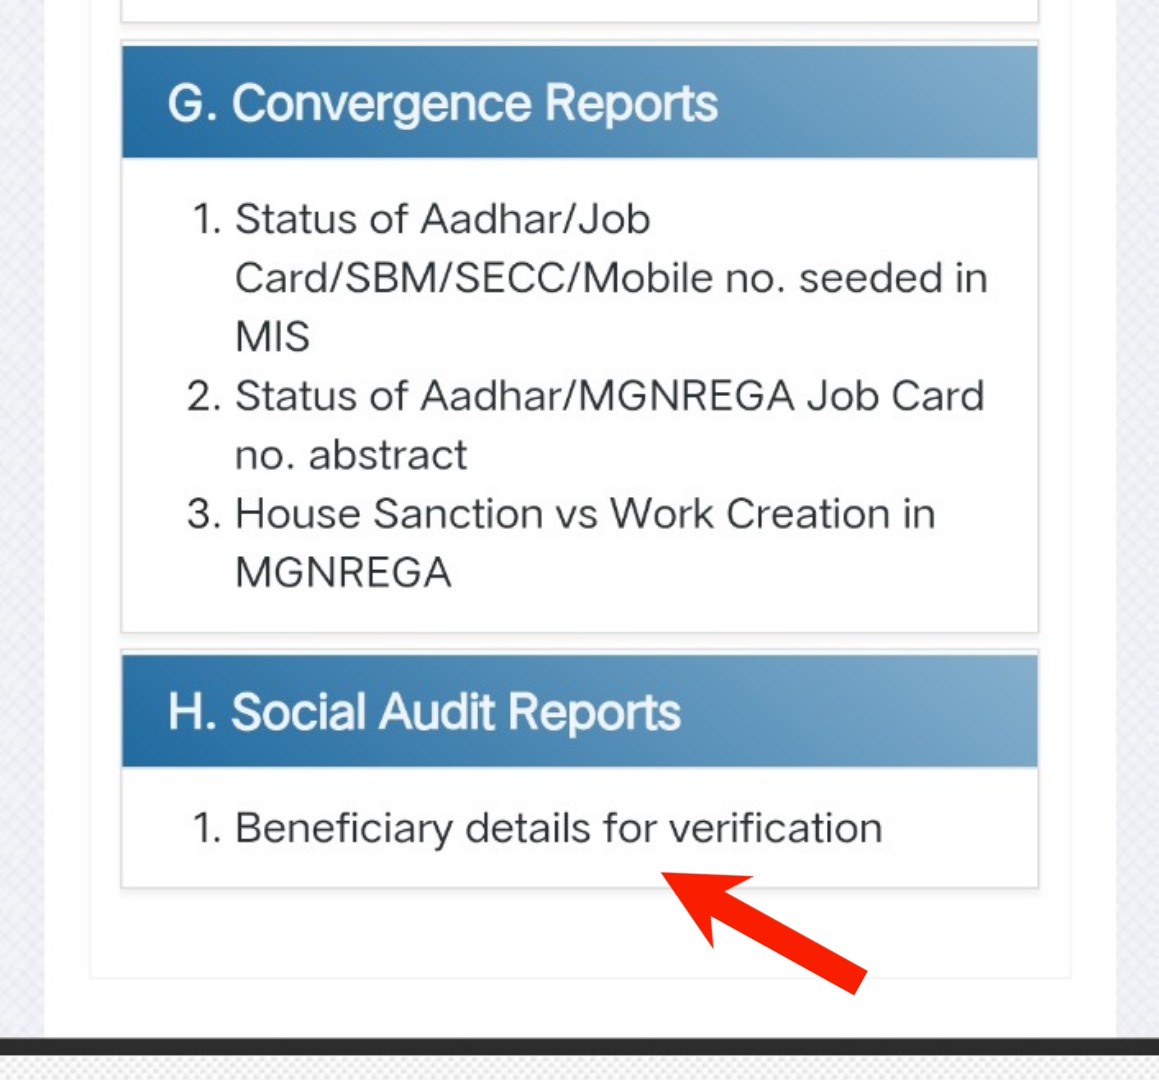 Beneficiary details for verification